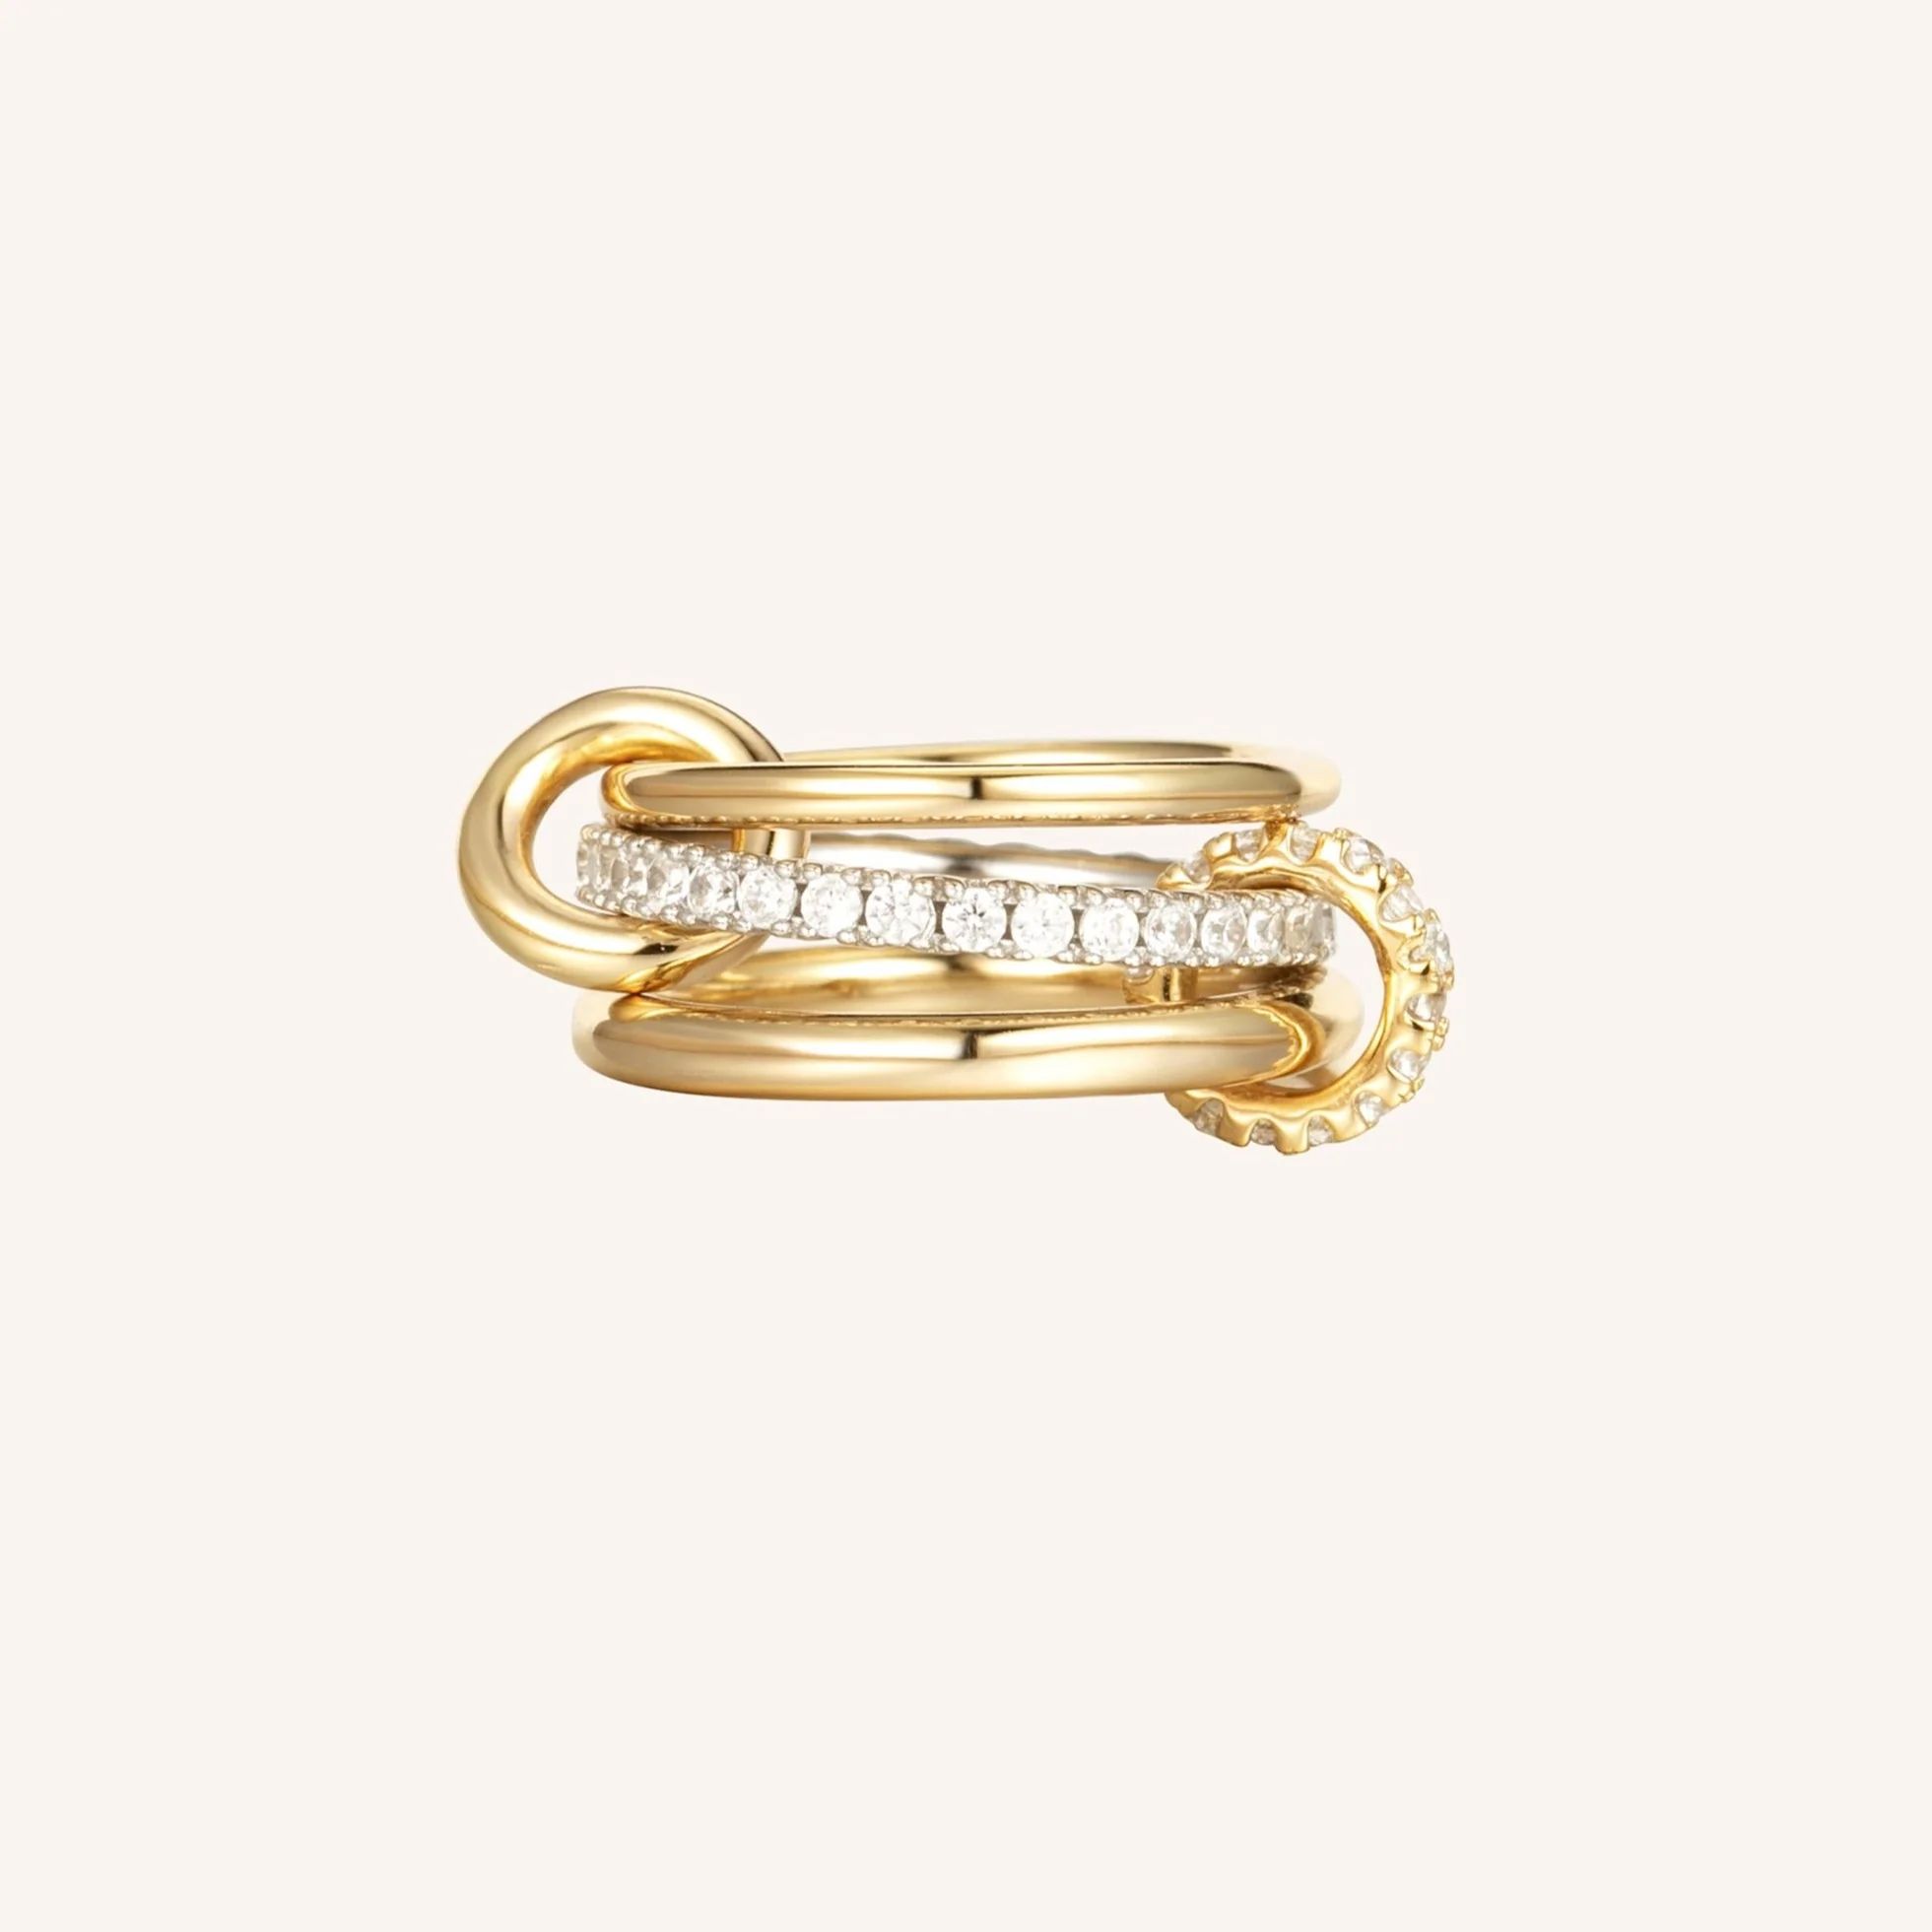 Rendezvous Ring | Victoria Emerson